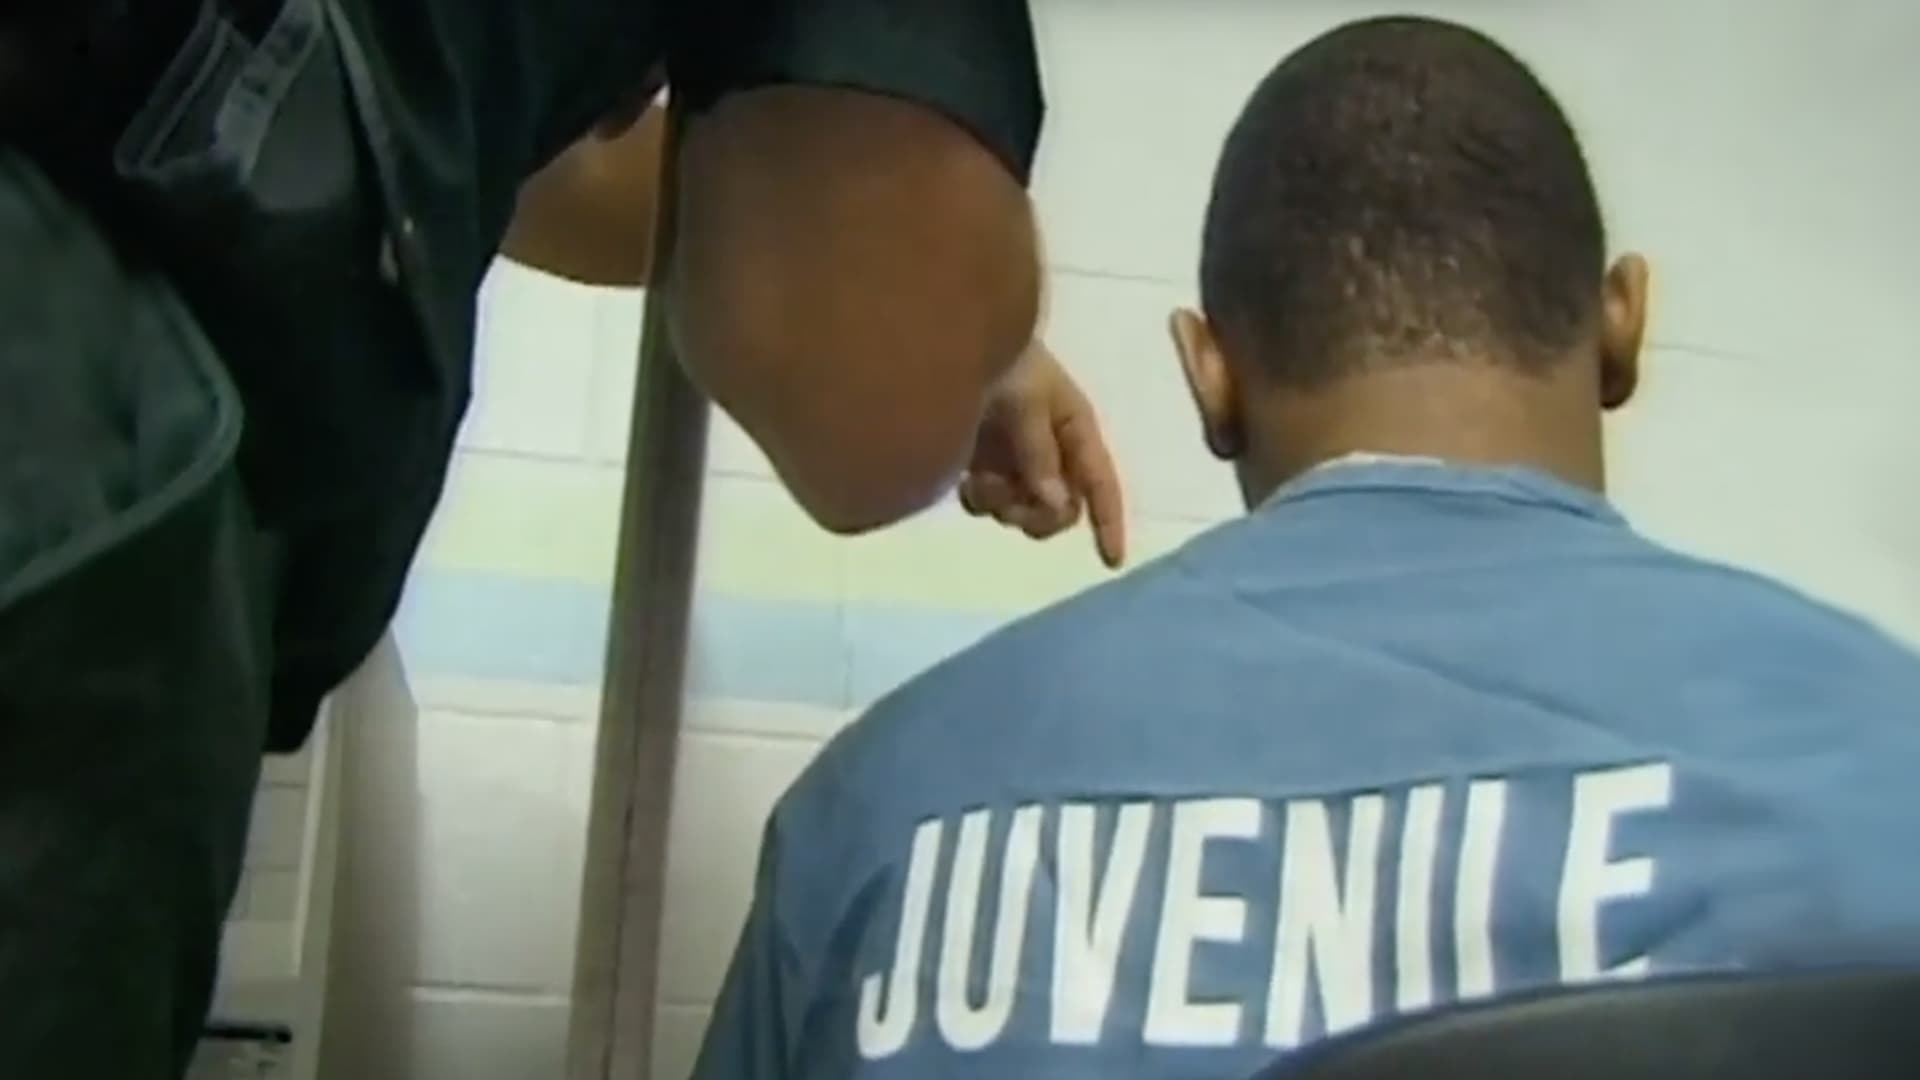 Screengrab of back of prisoner with "juvenile" written on his shirt